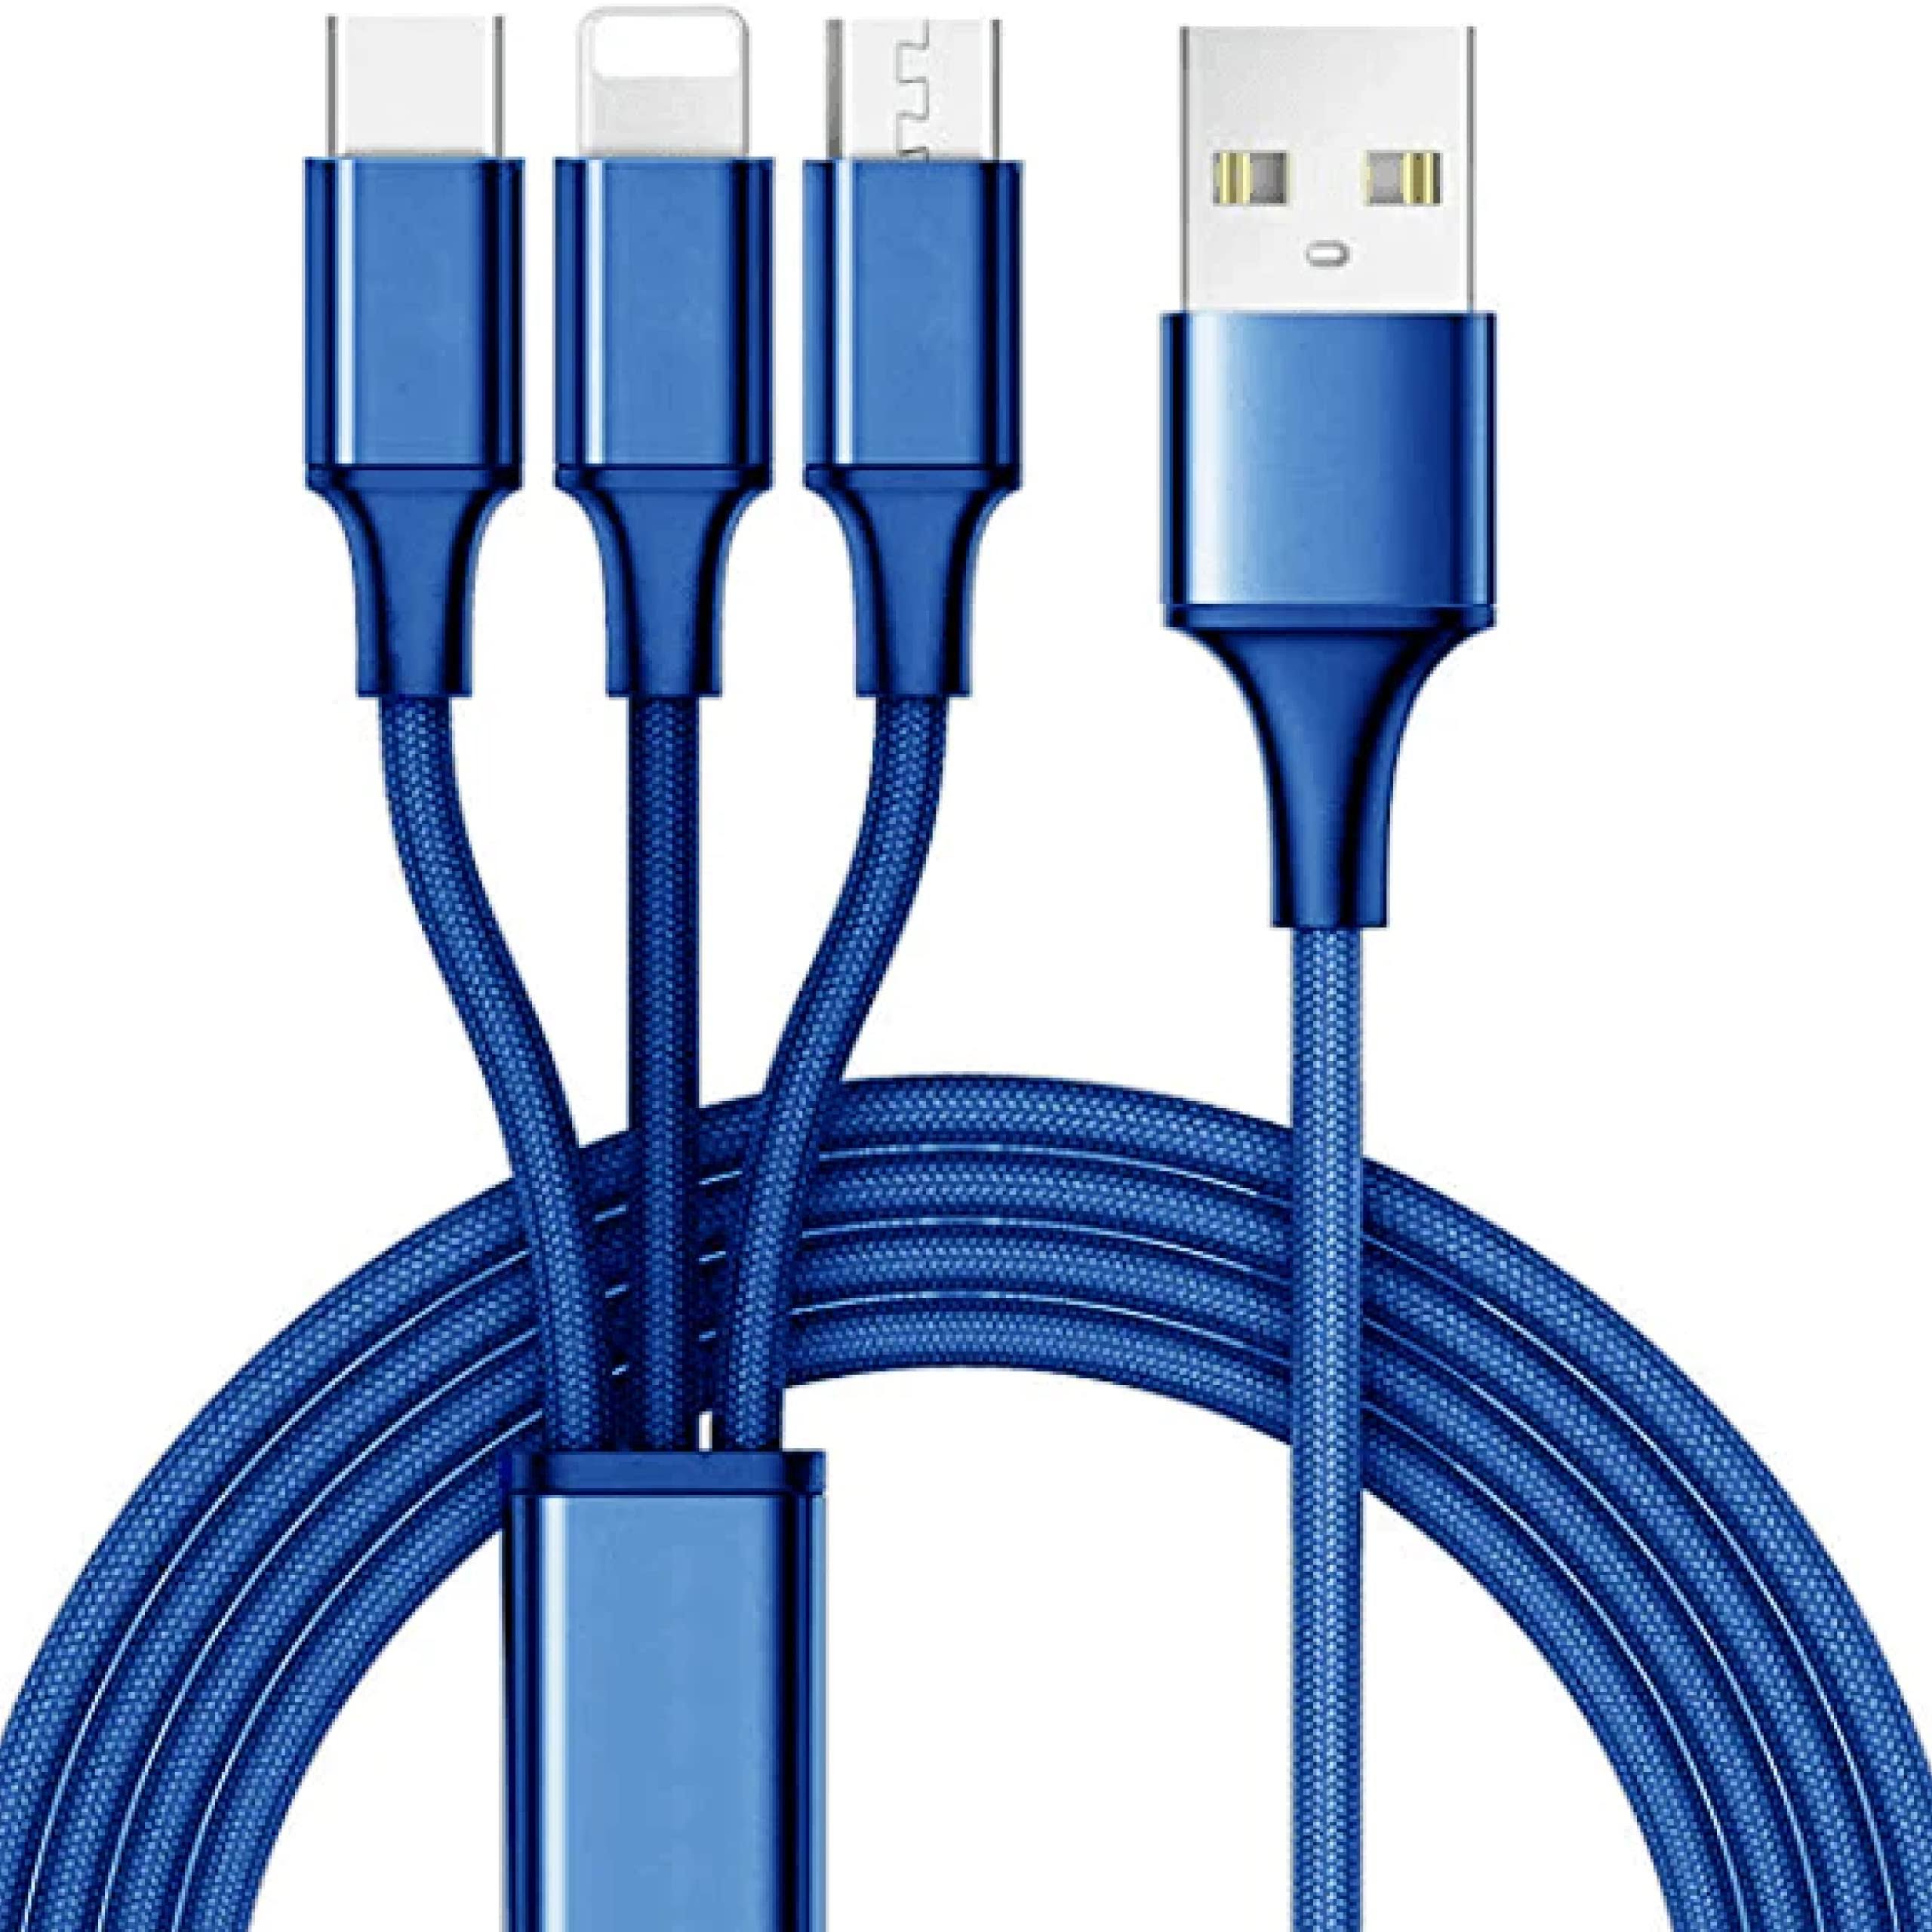 Boxed 10 ft. 3-in-1 USB Multi Charging Cable - Blue